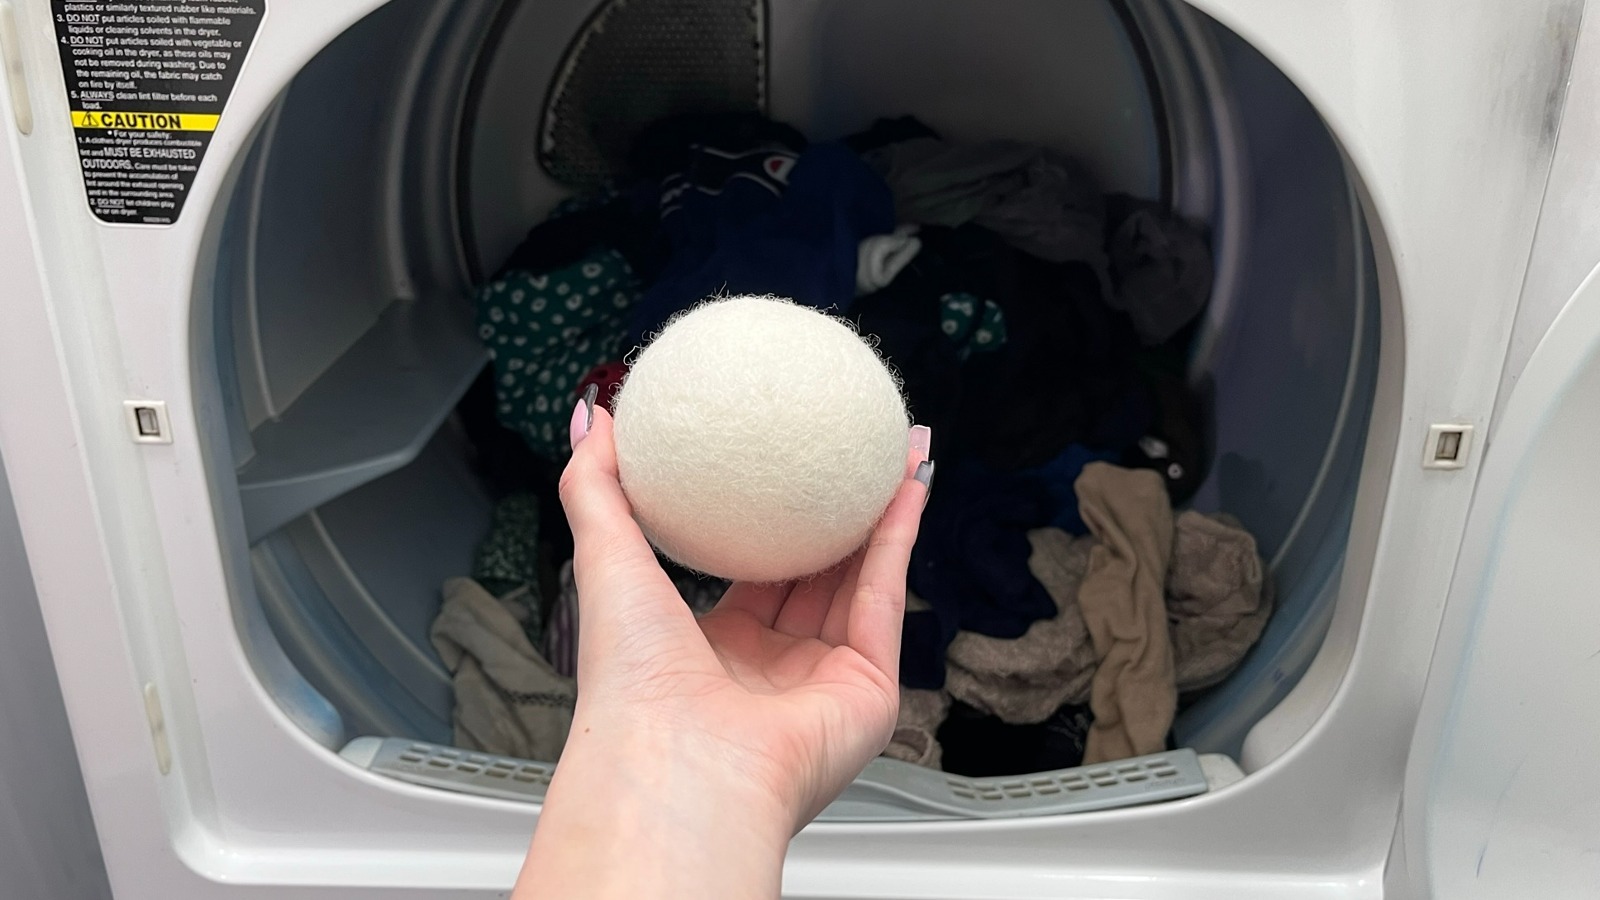 Do wool dryer balls work? Ways to use them effectively  Essential oils for  laundry, Dryer balls, Essential oils cleaning